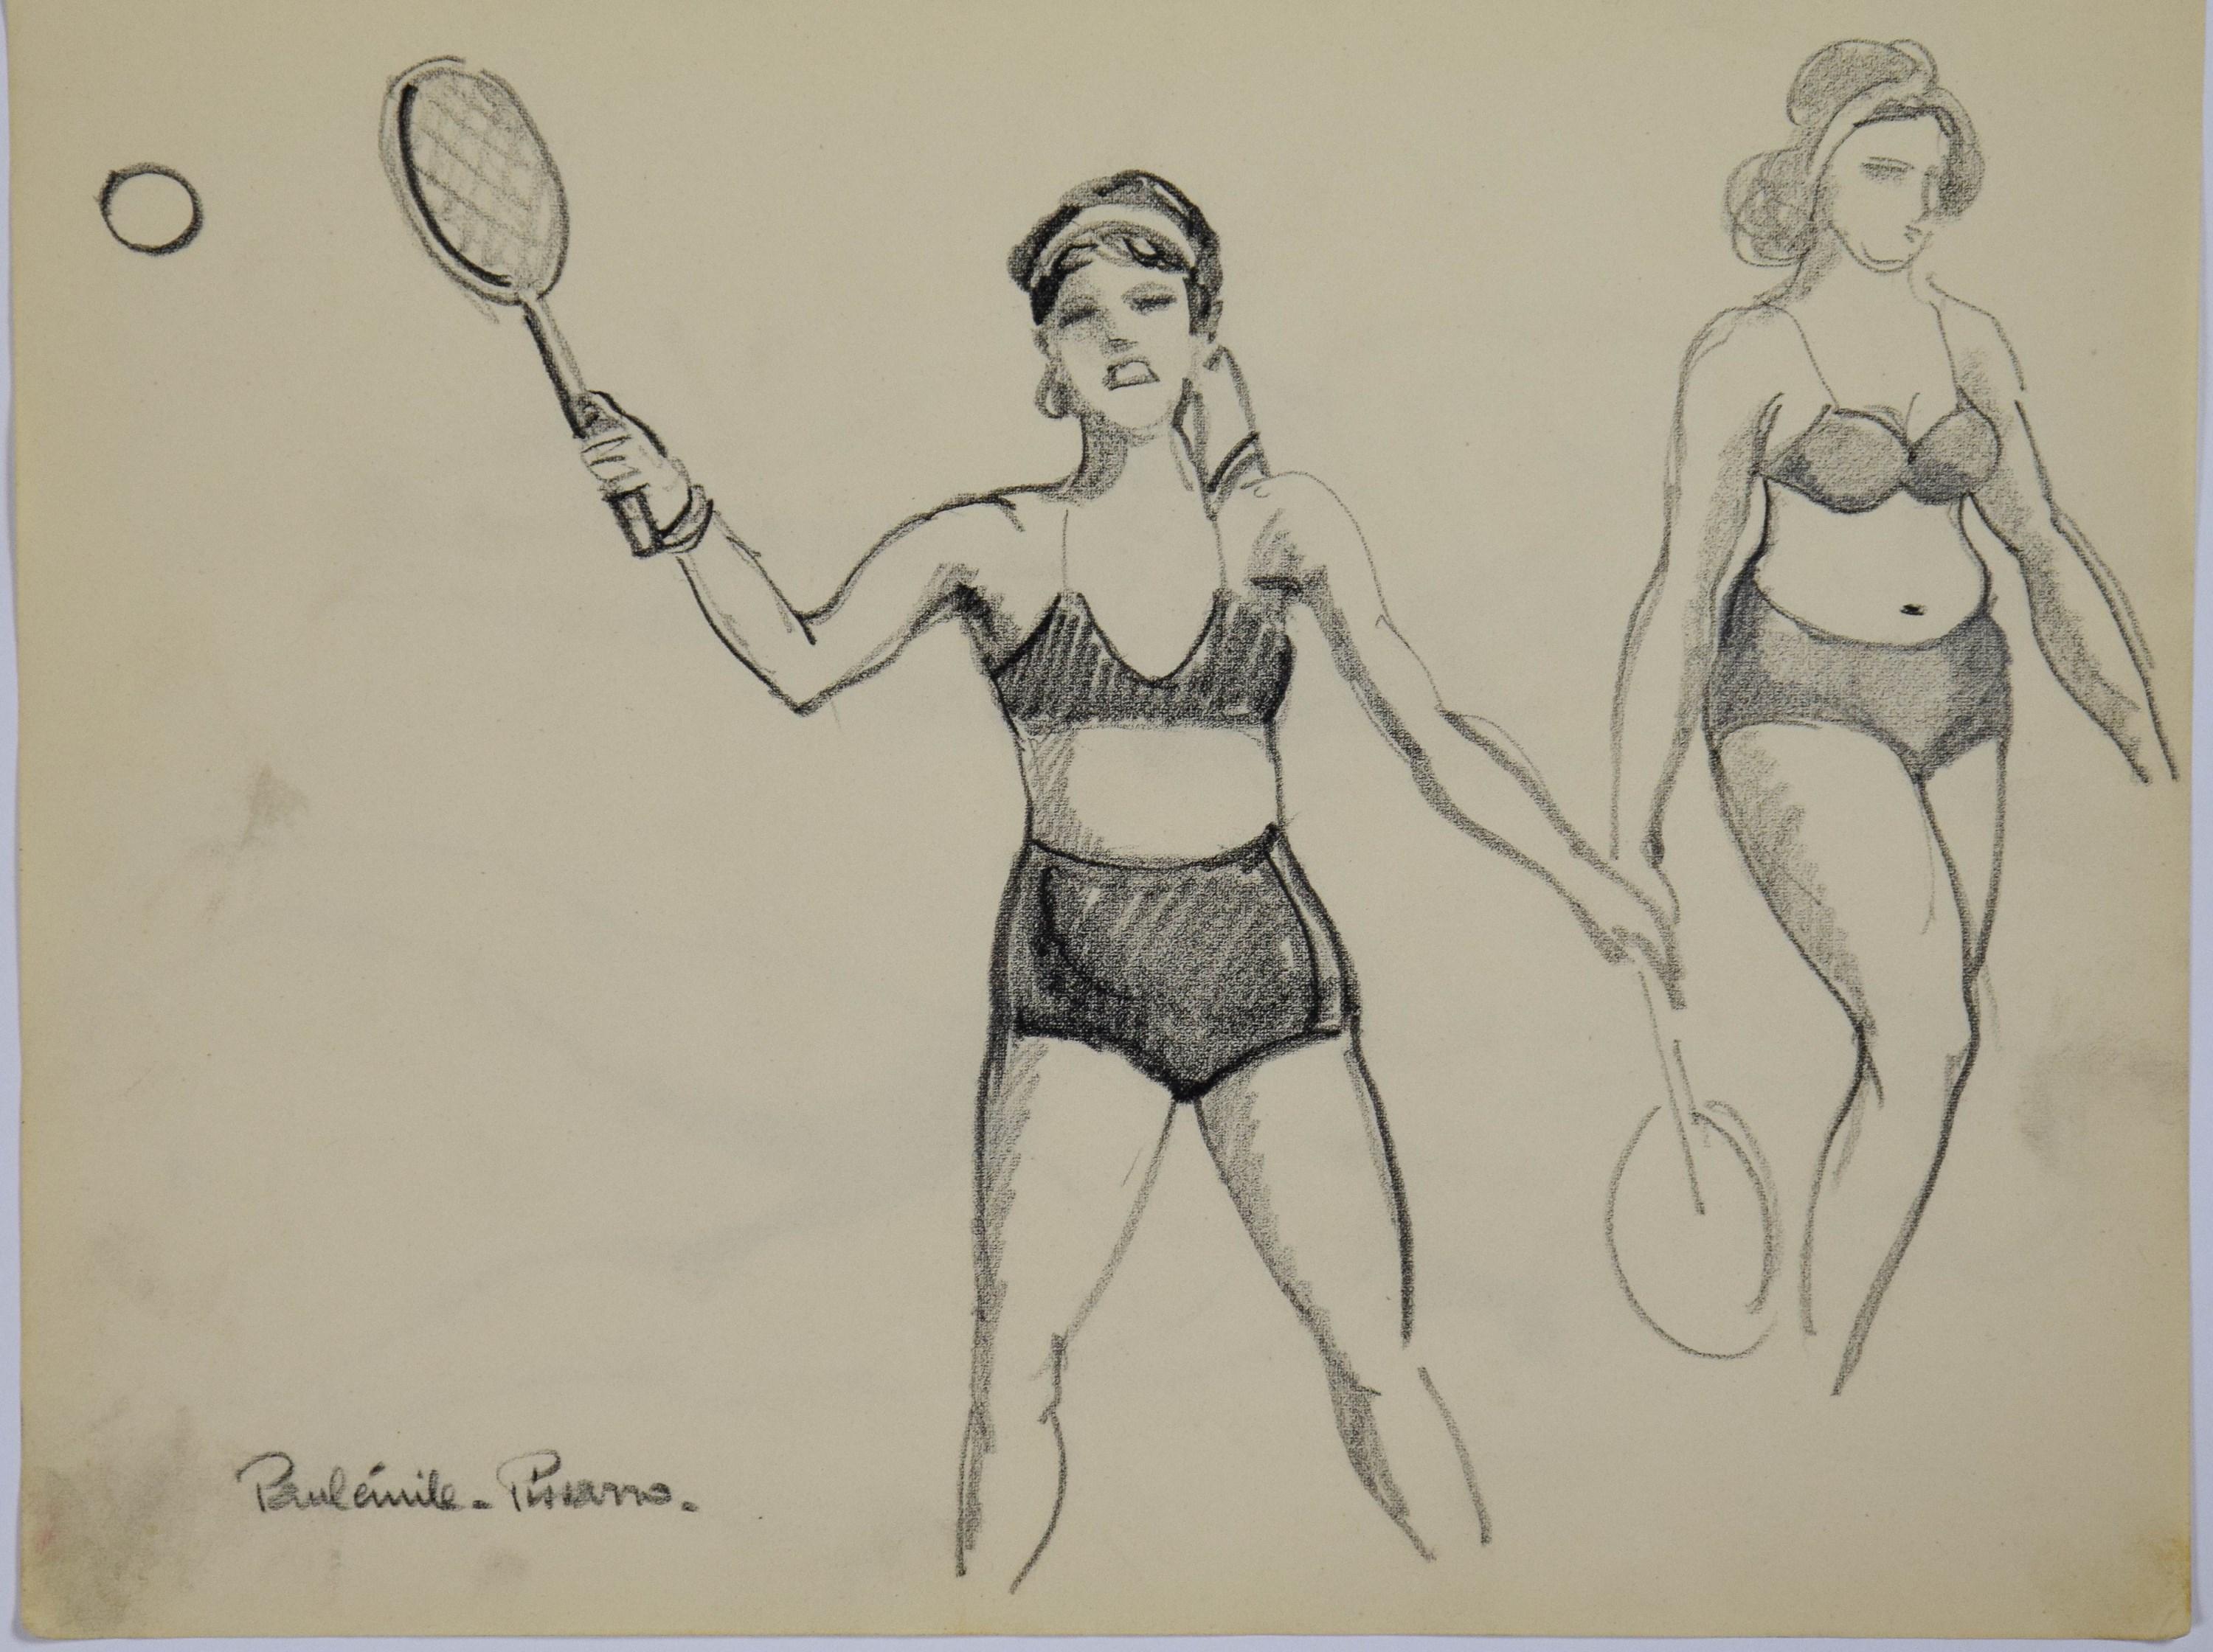 THIS WORK IS SOLD UNFRAMED 

Yvonne Jouant au Tennis by Paulémile Pissarro (1884 - 1972)
Graphite on paper
20.2 x 27 cm (8 x 10 ⁵/₈ inches)
Signed lower left, Paulémile-Pissarro-

Paulémile here depicts his wife playing tennis. This work is